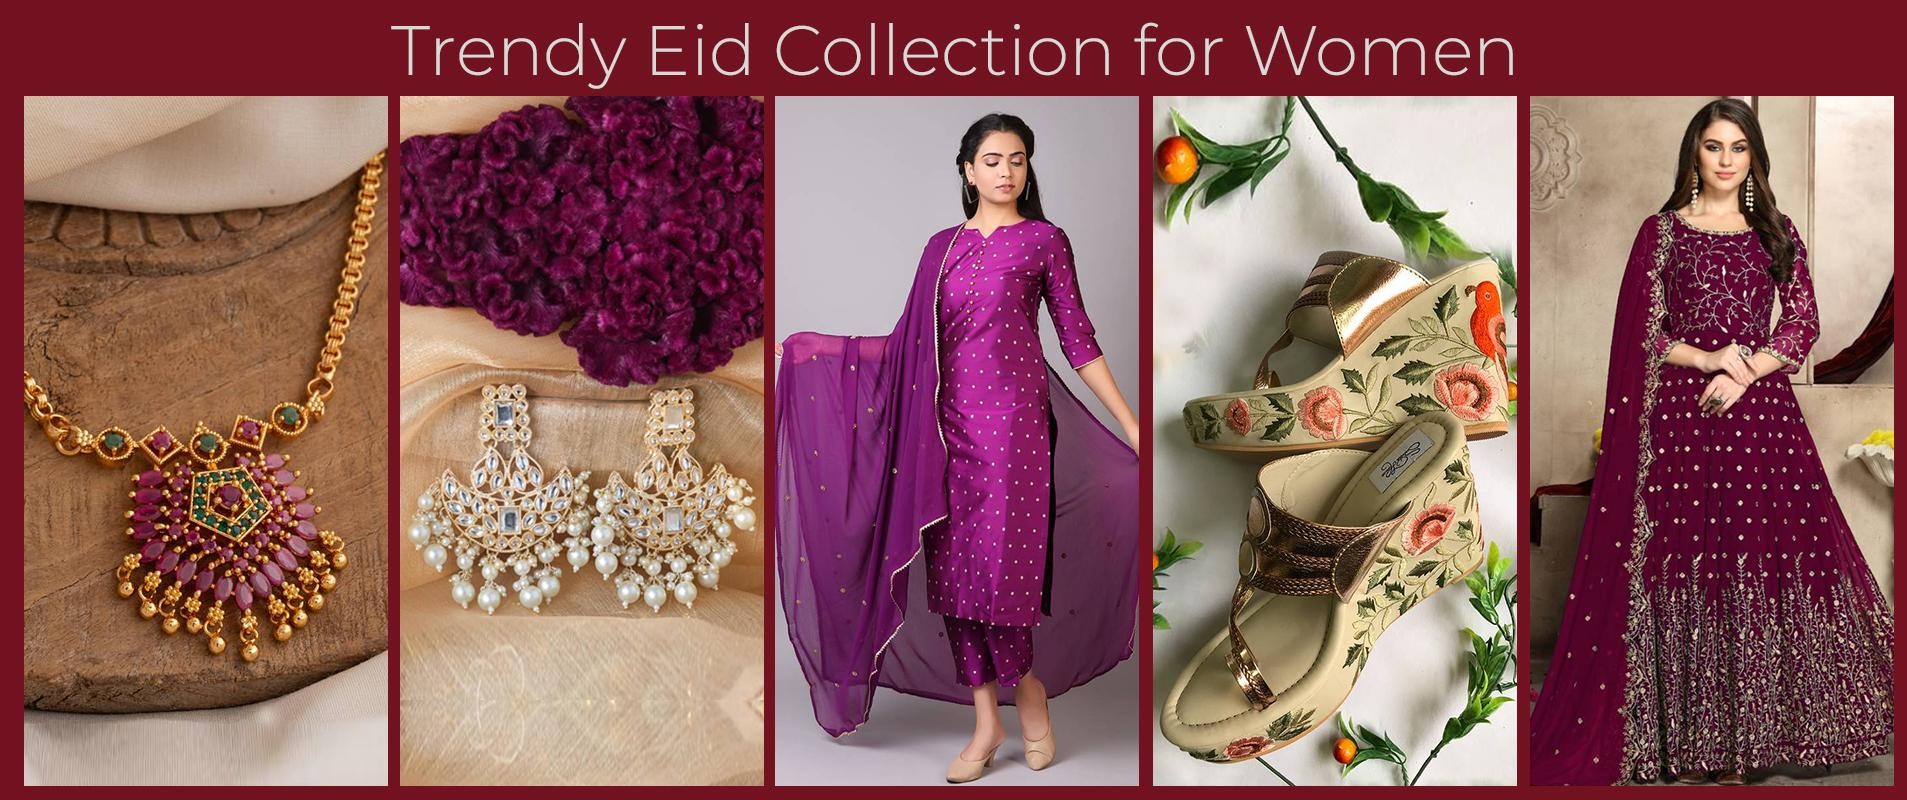 eid collection for women